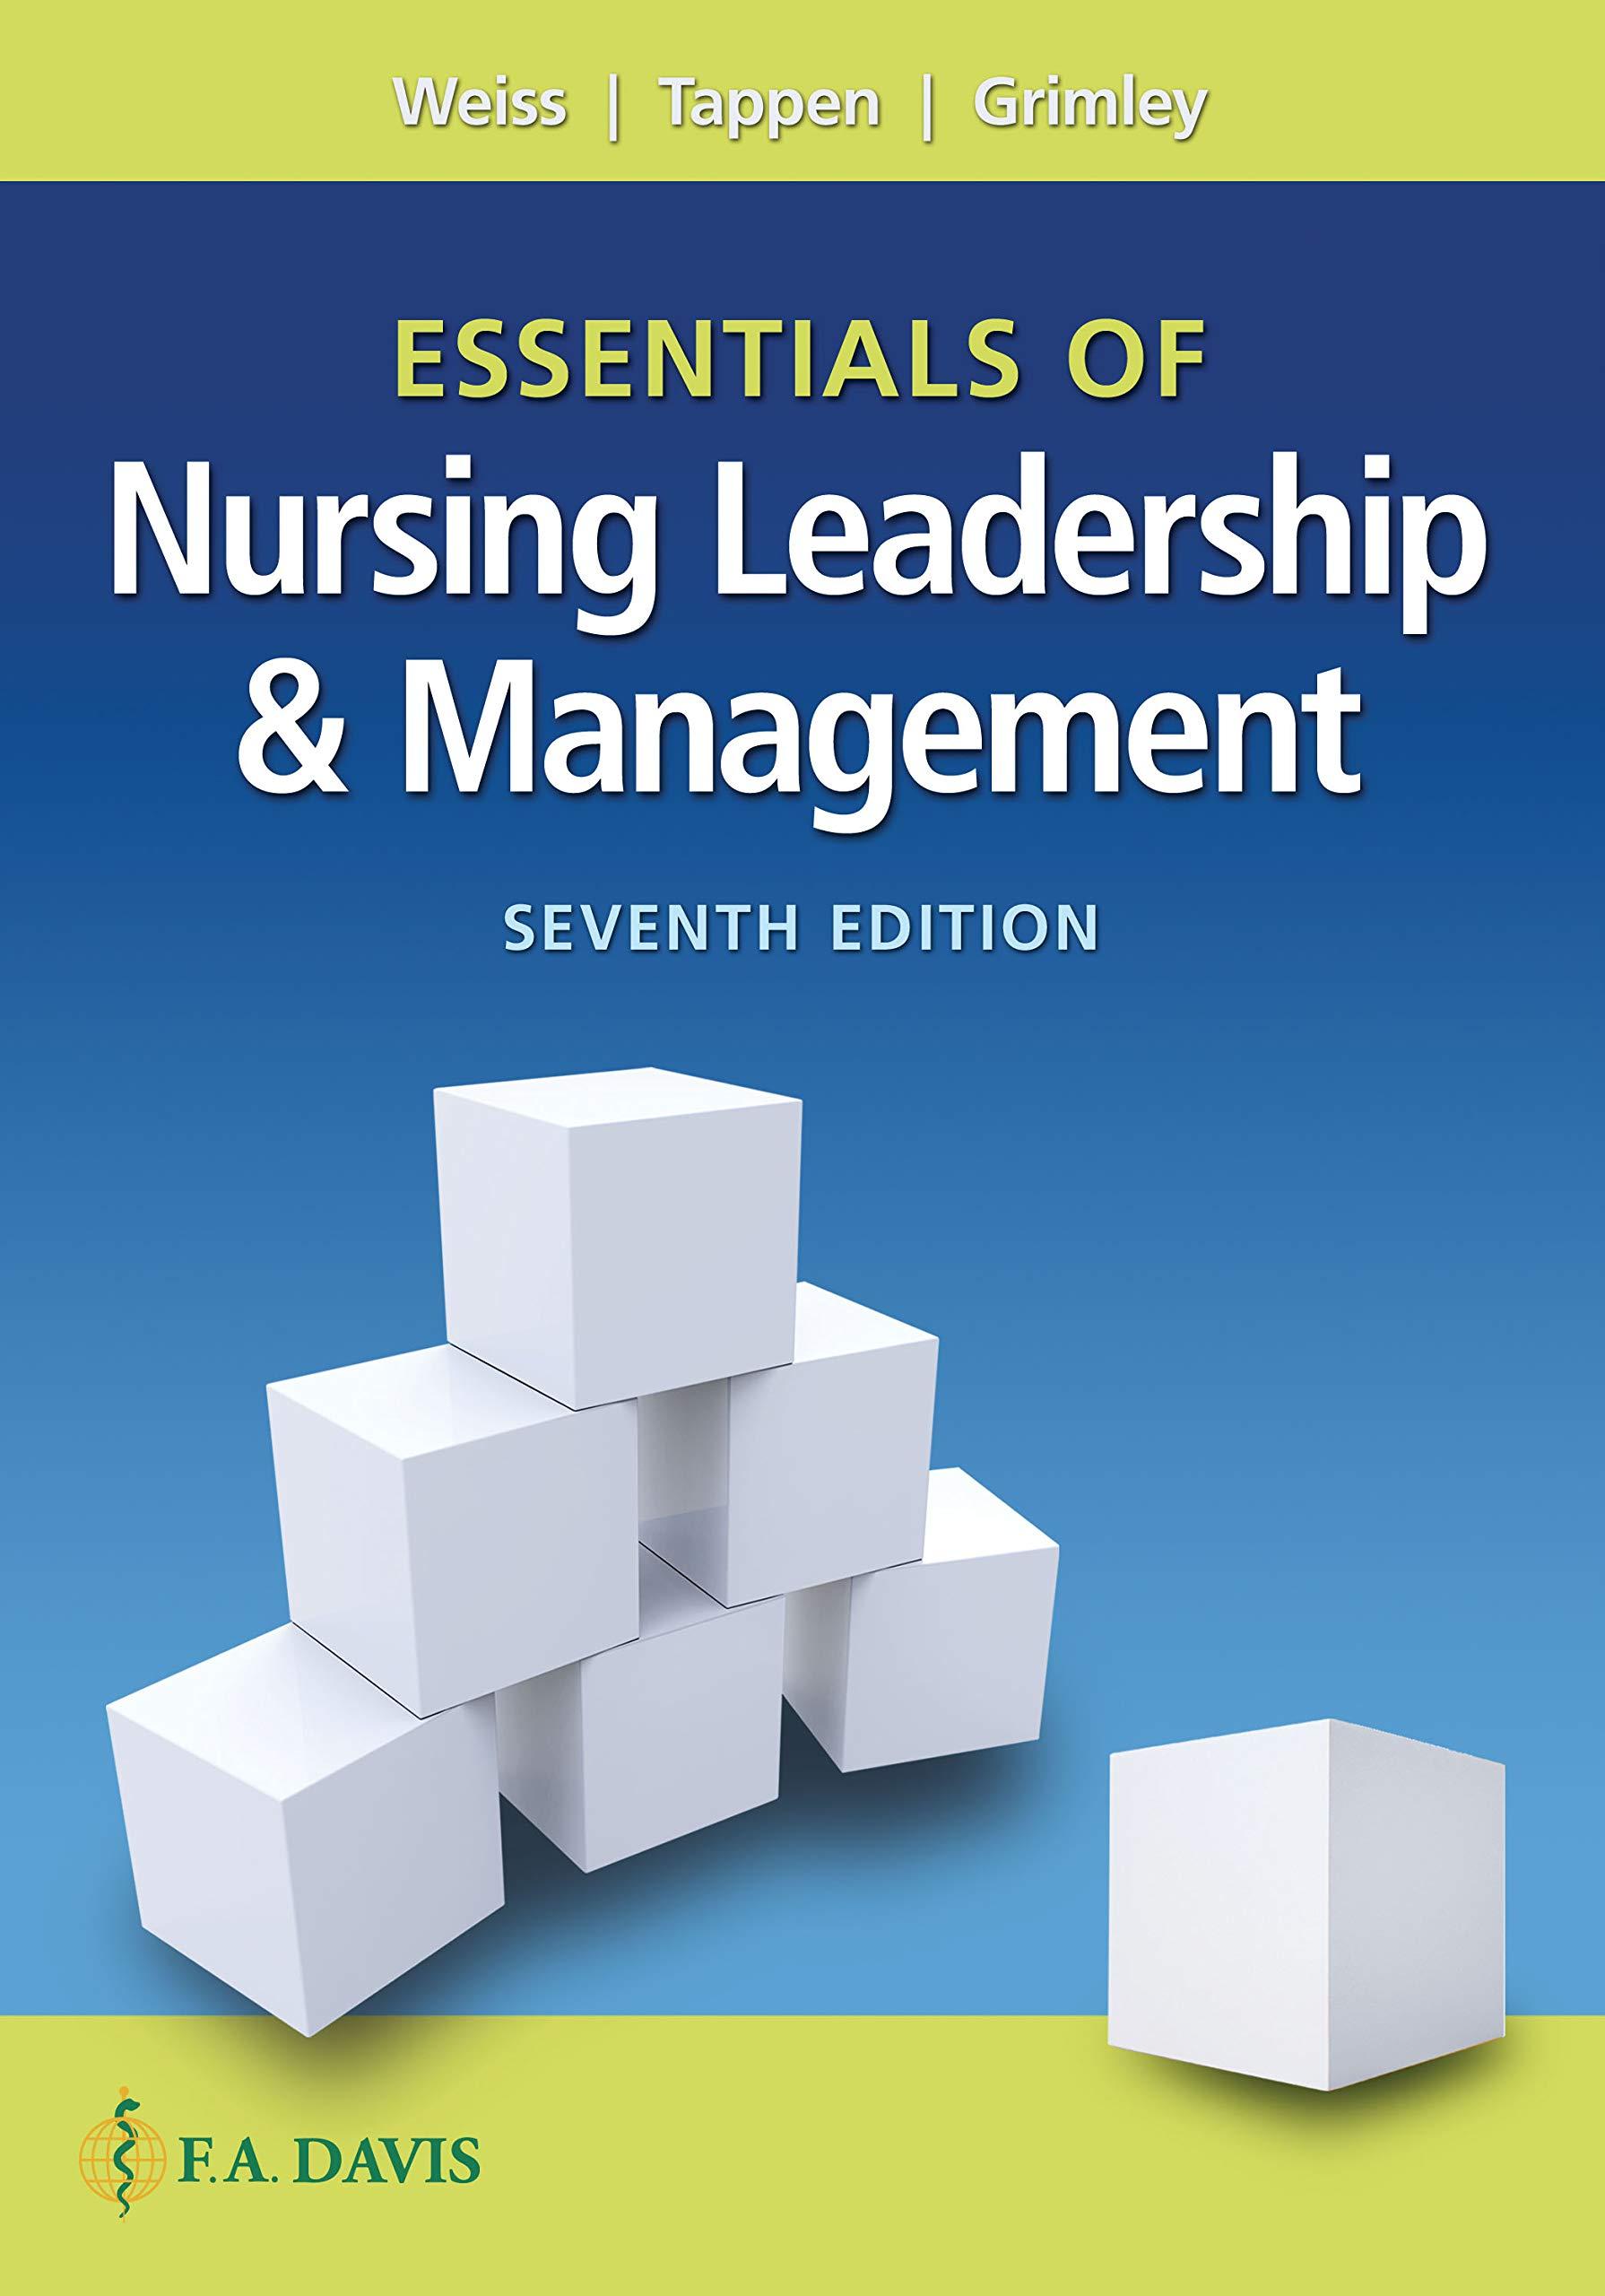 essentials of nursing leadership and management 7th edition sally a. weiss, ruth m. tappen, karen grimley